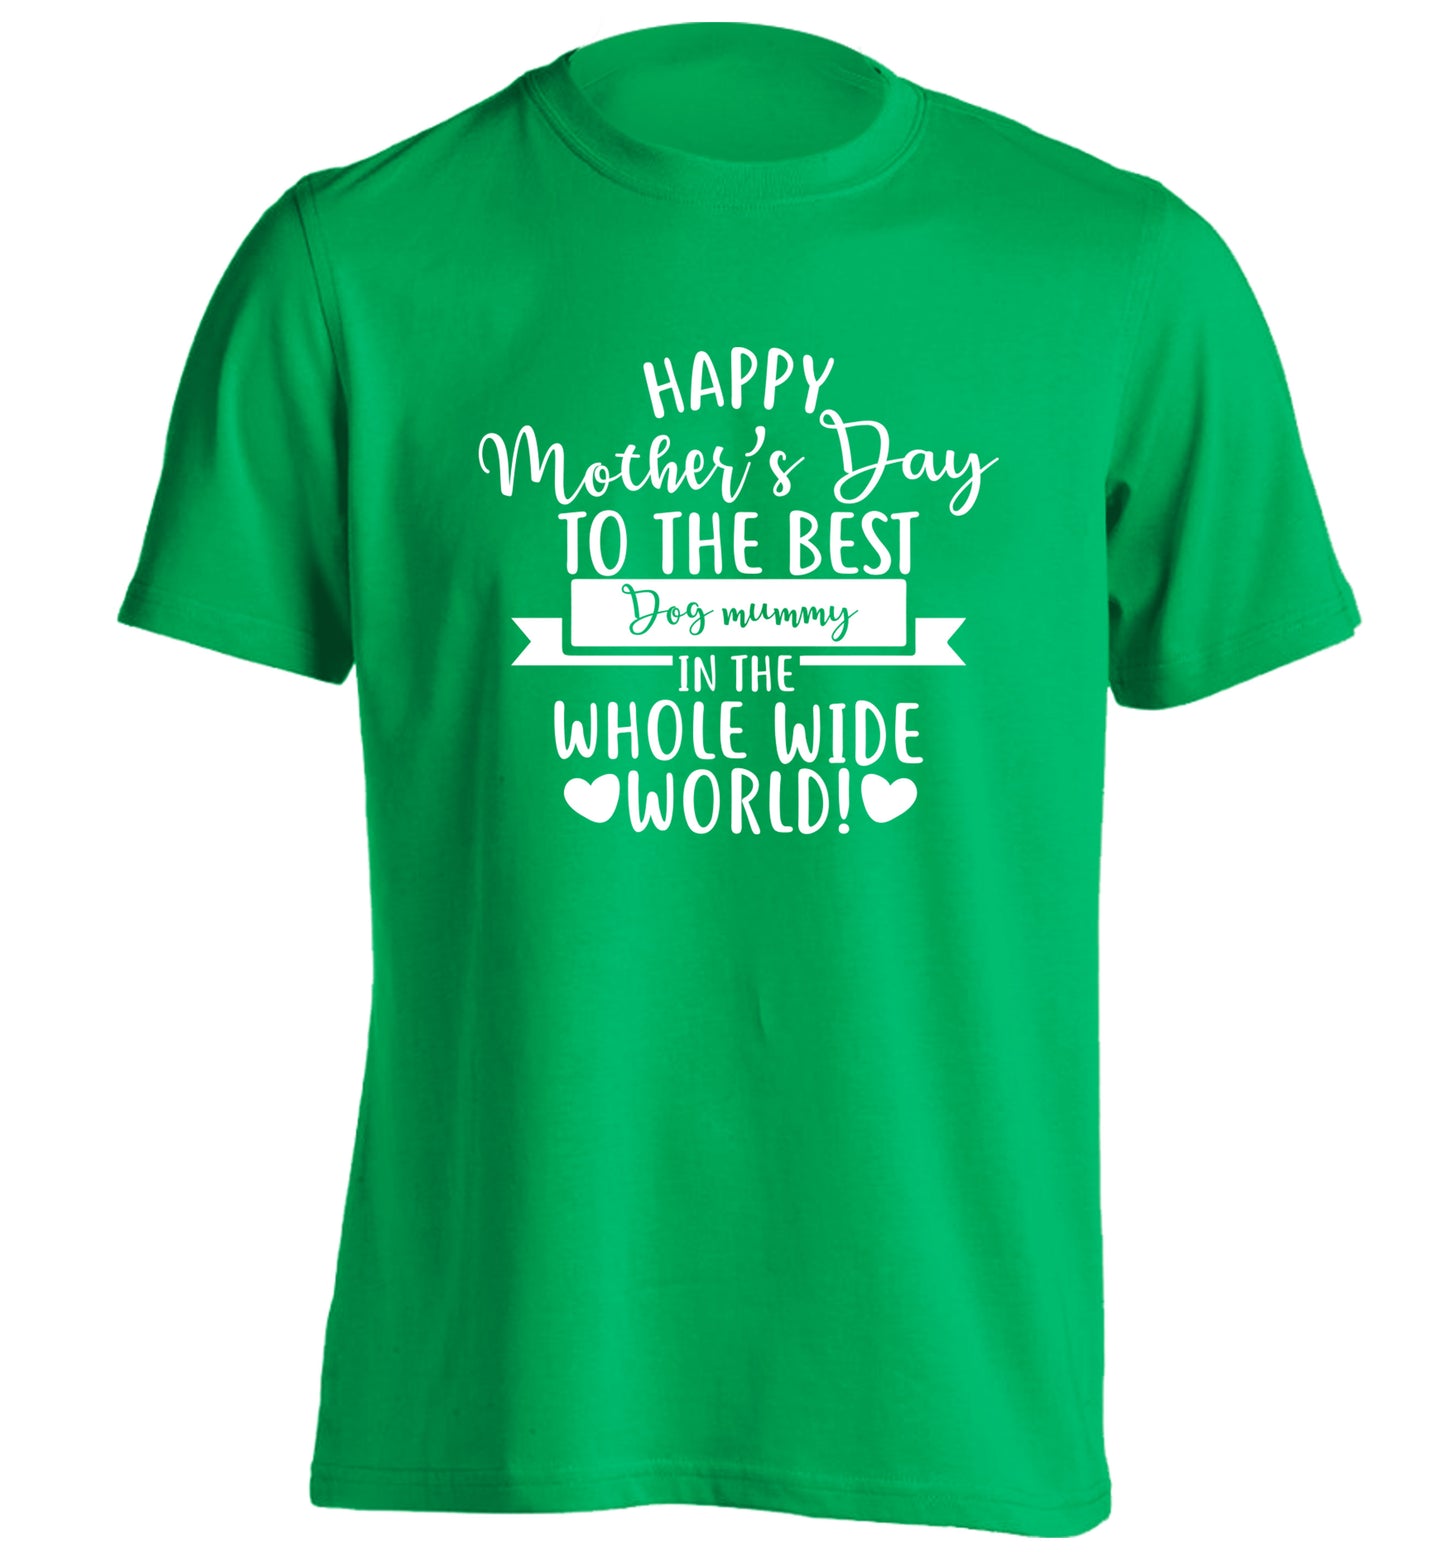 Happy mother's day to the best dog mummy in the world adults unisex green Tshirt 2XL